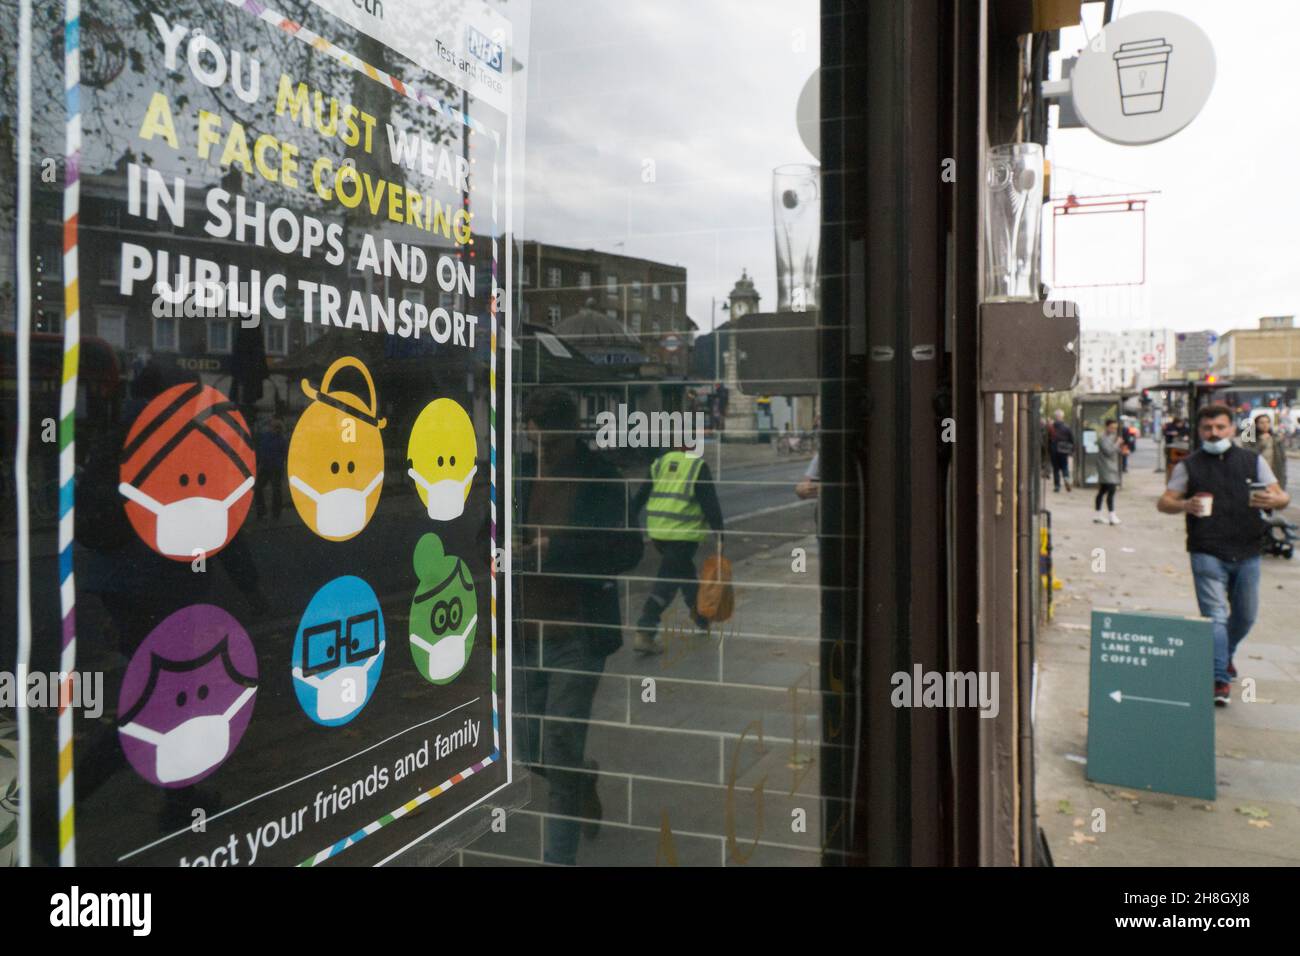 London, UK, 30 November 2021: In Clapham shoppers are now obliged by law to wear a face mask in shops or on public transport. In a shop window a colourful sign depicting a diverse array of people wearing face masks, supplied by Lambeth Council, reminds people of the change in regulations which has come into effect today. Anna Watson/Alamy Live News Stock Photo